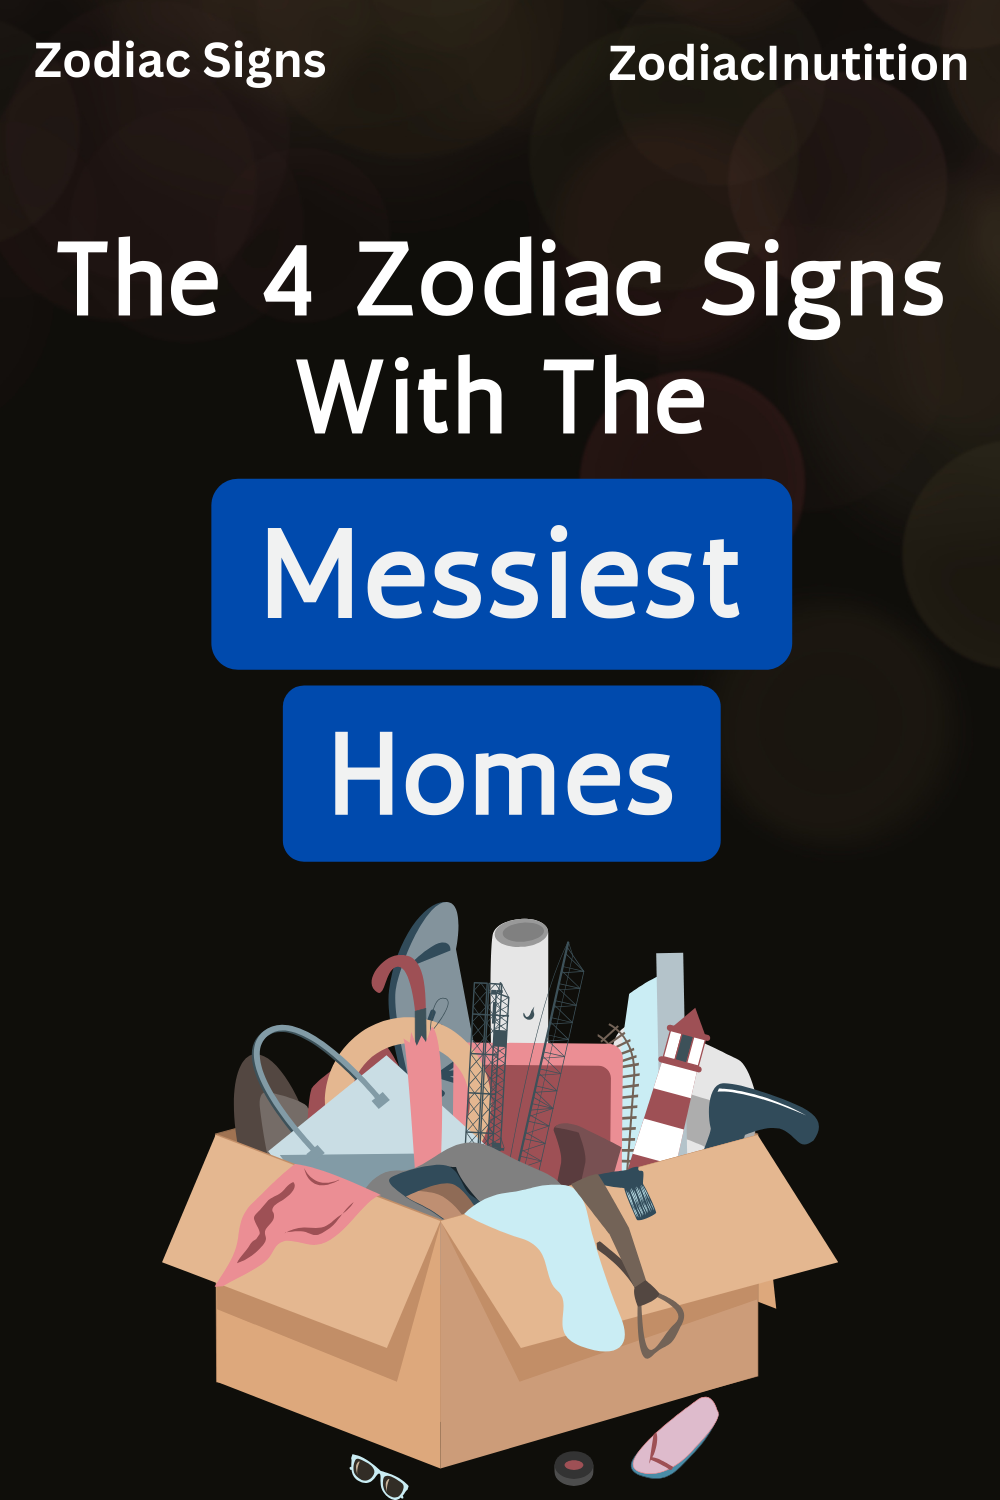 The 4 Zodiac Signs With The Messiest Homes